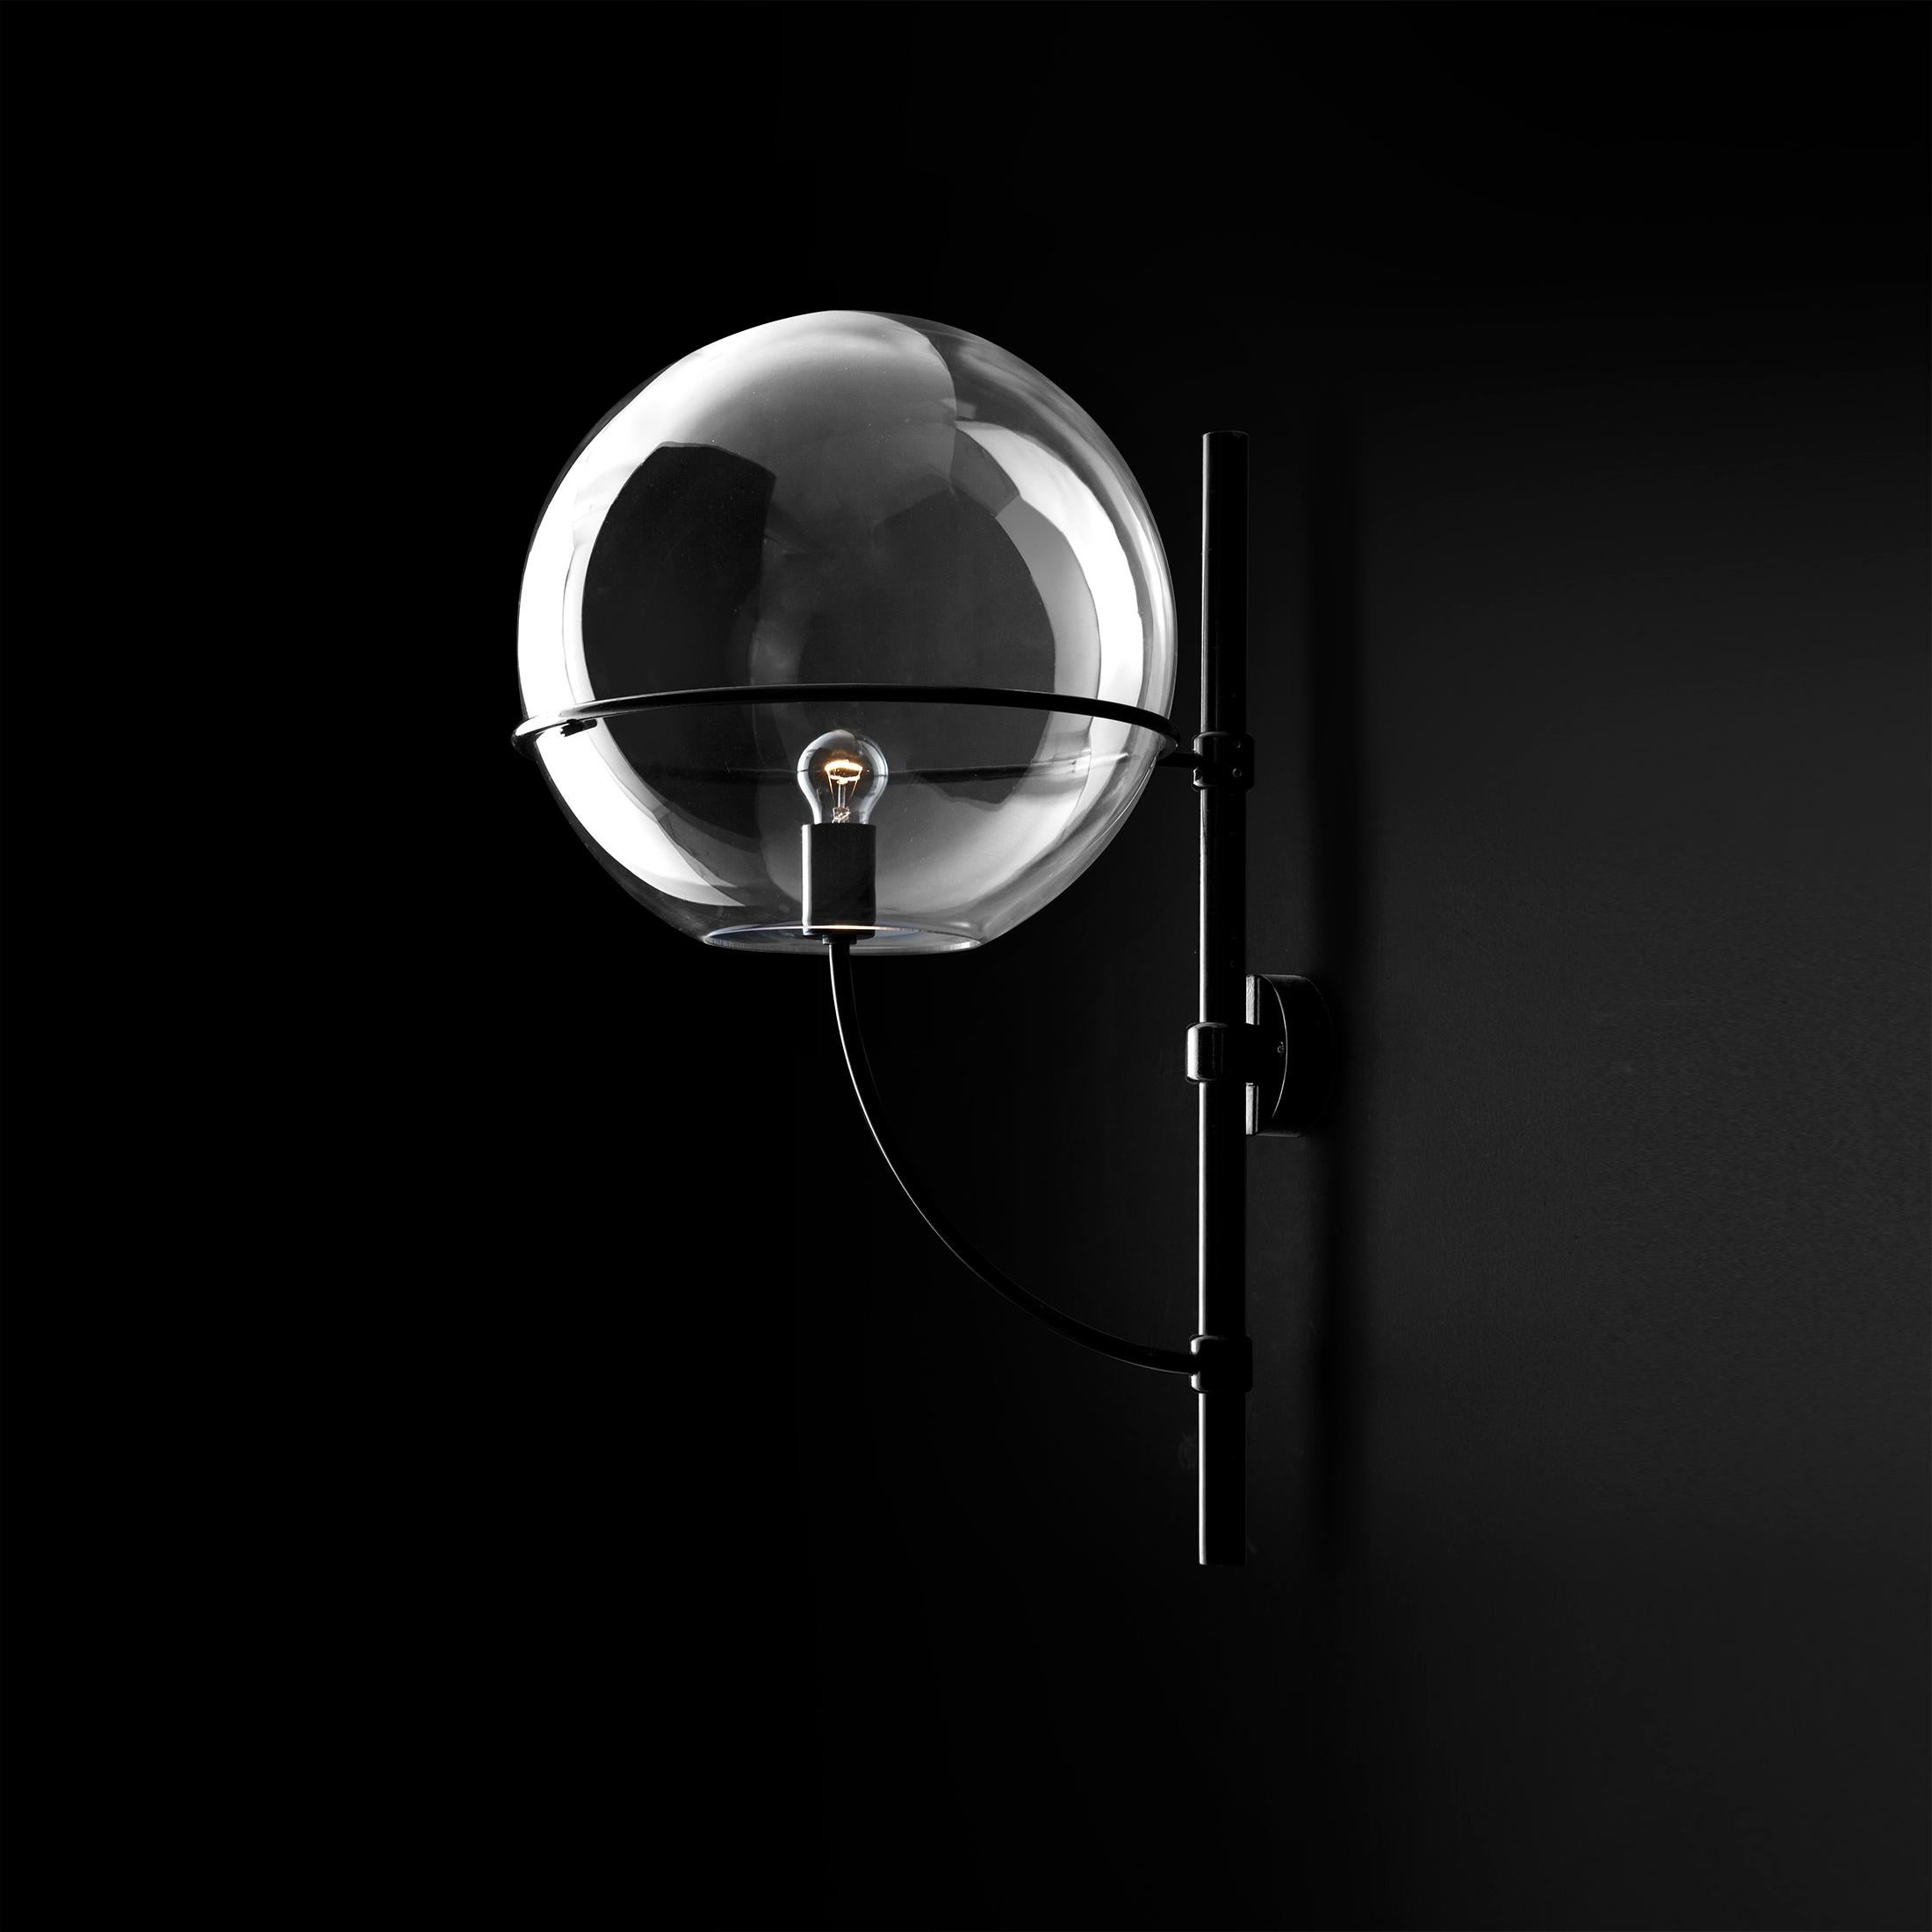 Wall lamp 'Lyndon' designed by Vico Magistretti in 1980.
Outside wall lamp. Zinc-plated and black lacquered metal structure, globes in transparent polycarbonate. Manufactured by Oluce, Italy.

Lyndon is a project by Vico Magistretti created in 1977